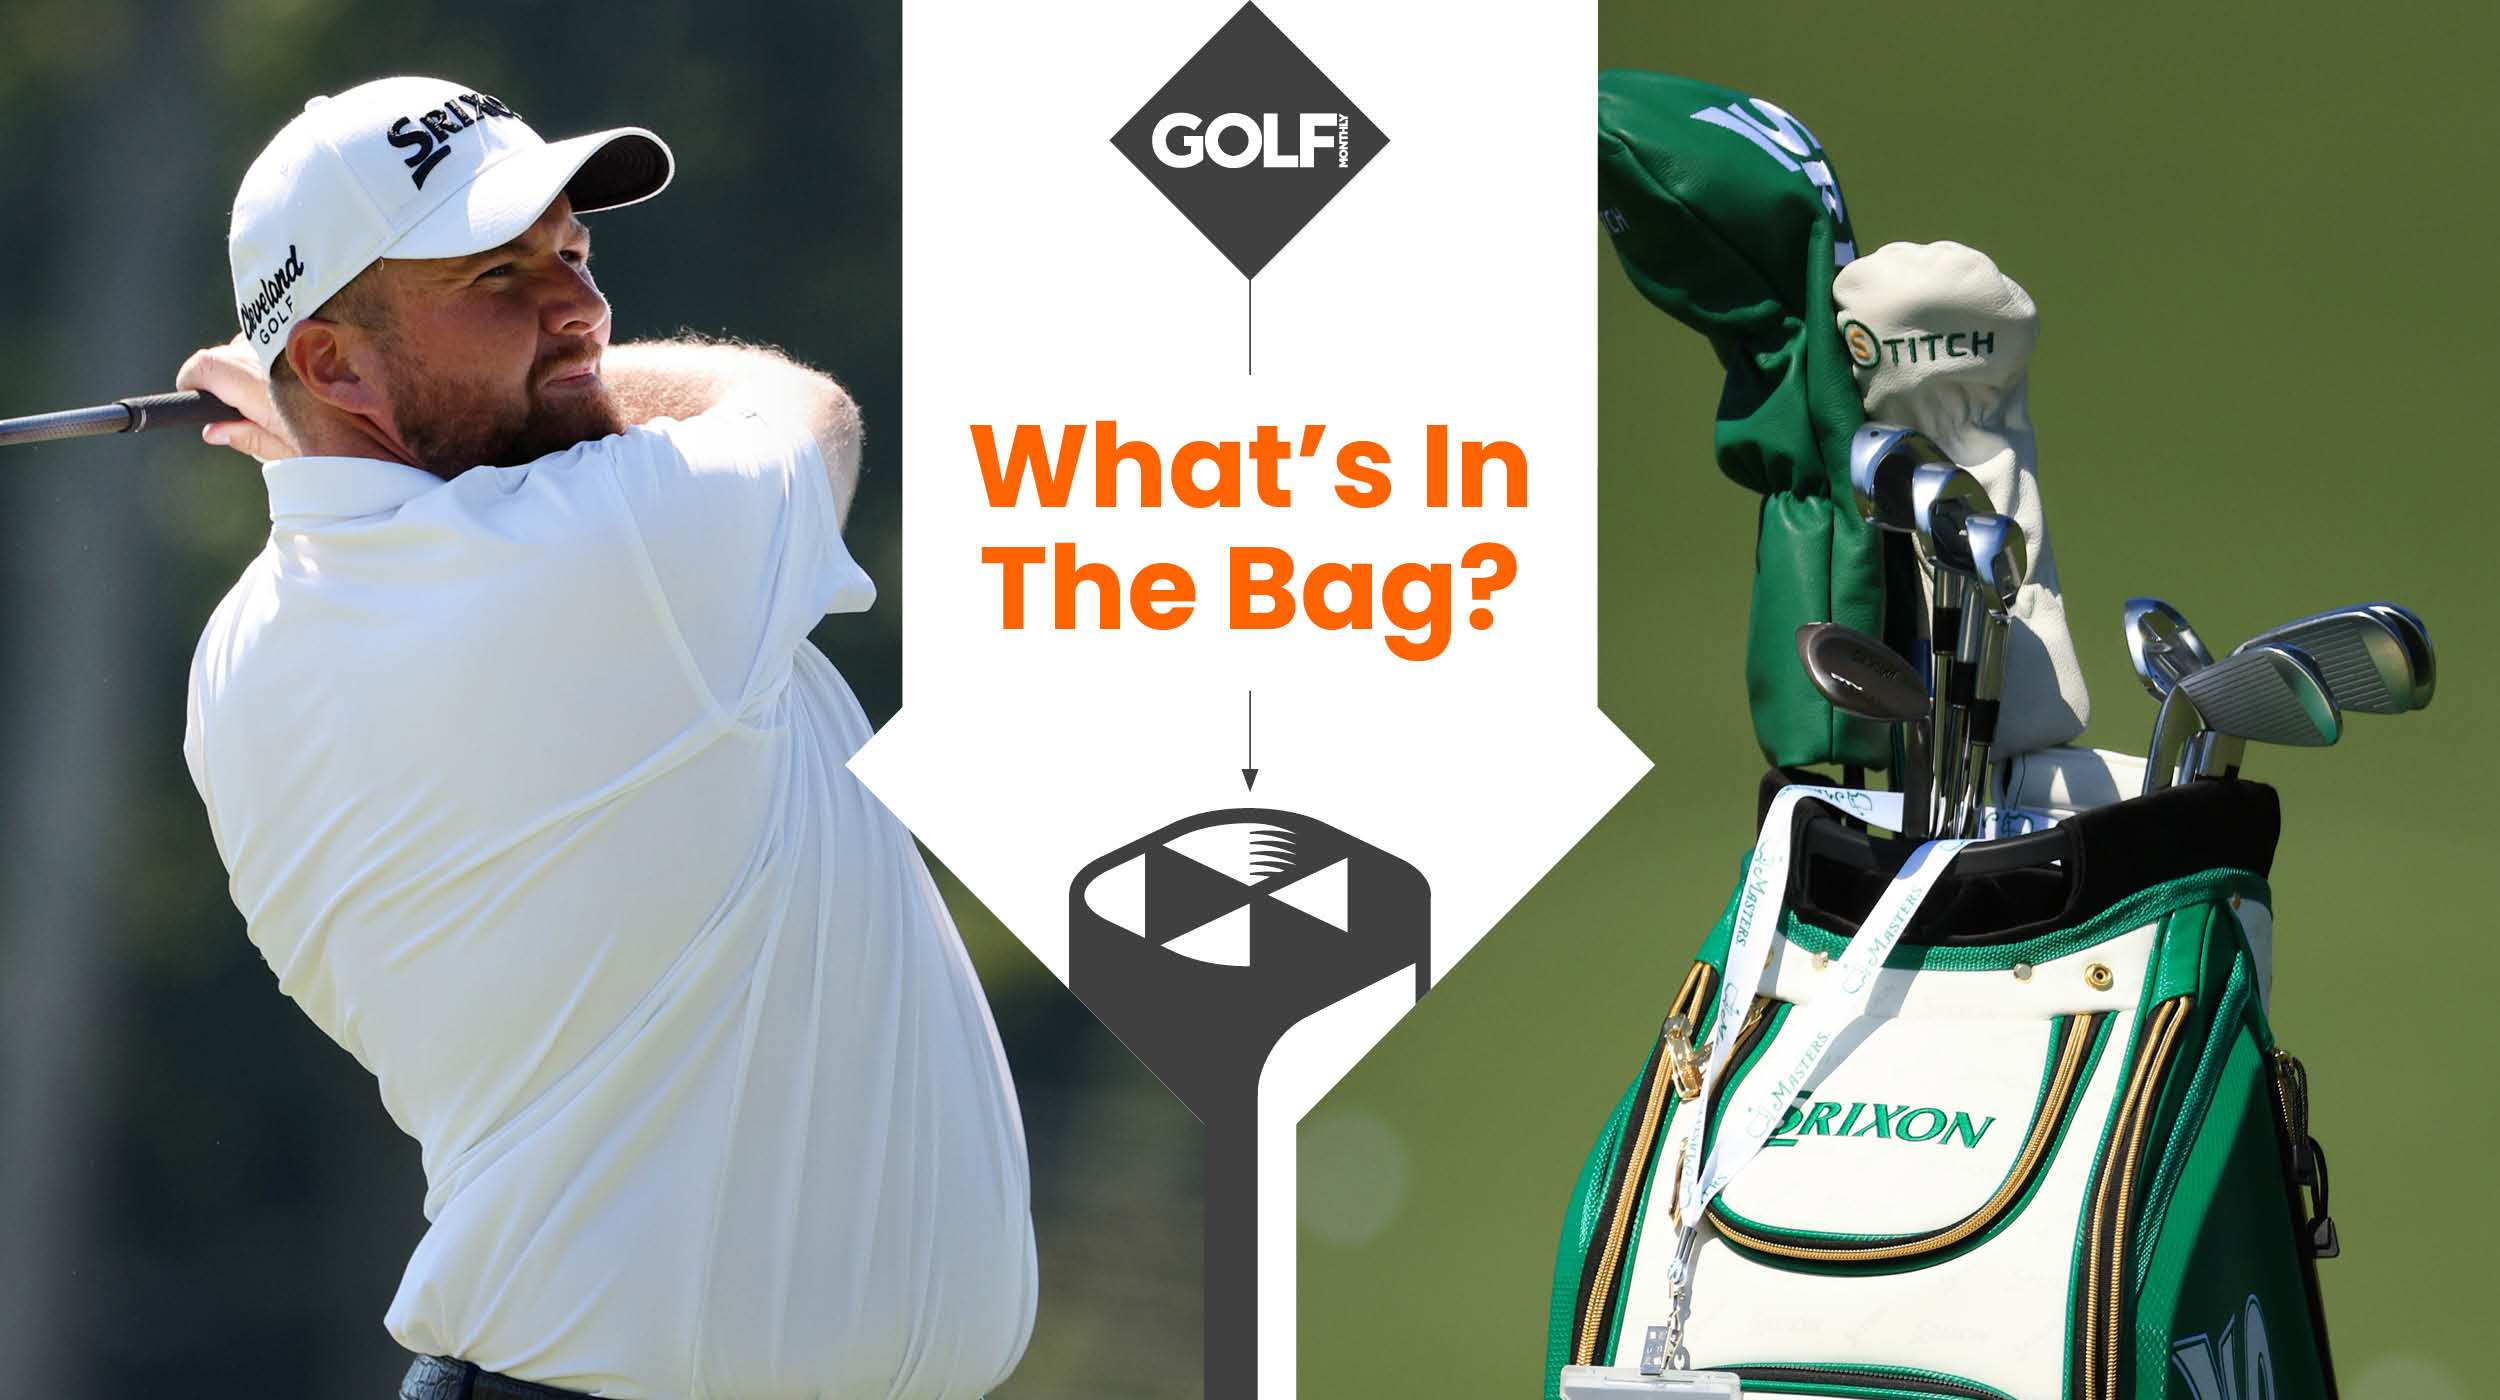 Shane Lowry Whats In The Bag?